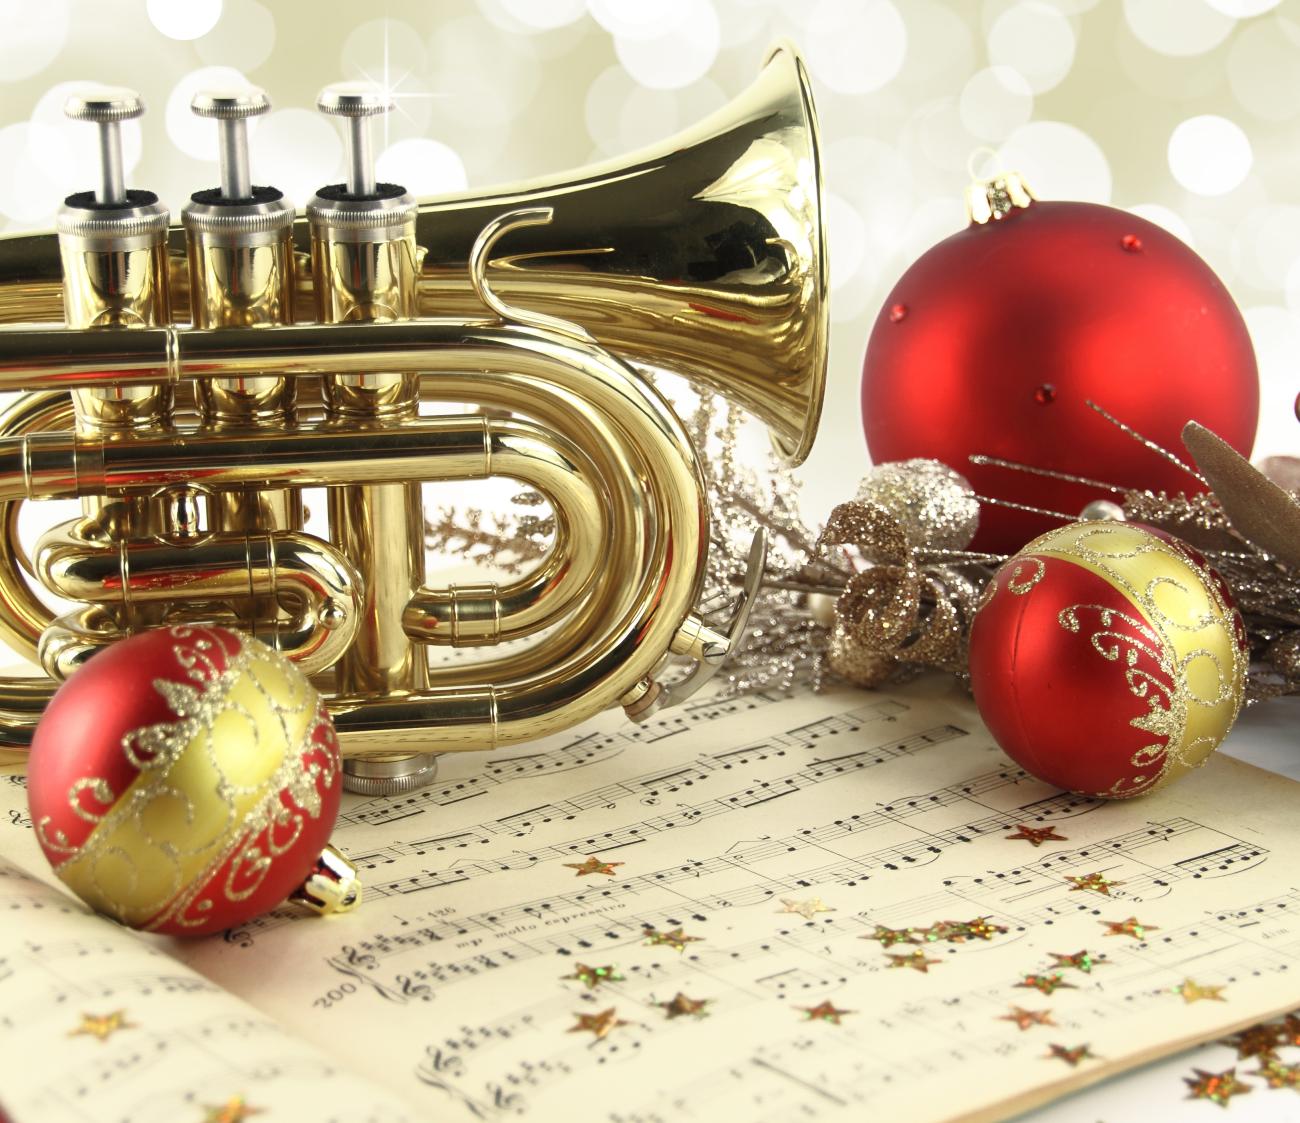 Trumpet with sheet music and holiday decorations